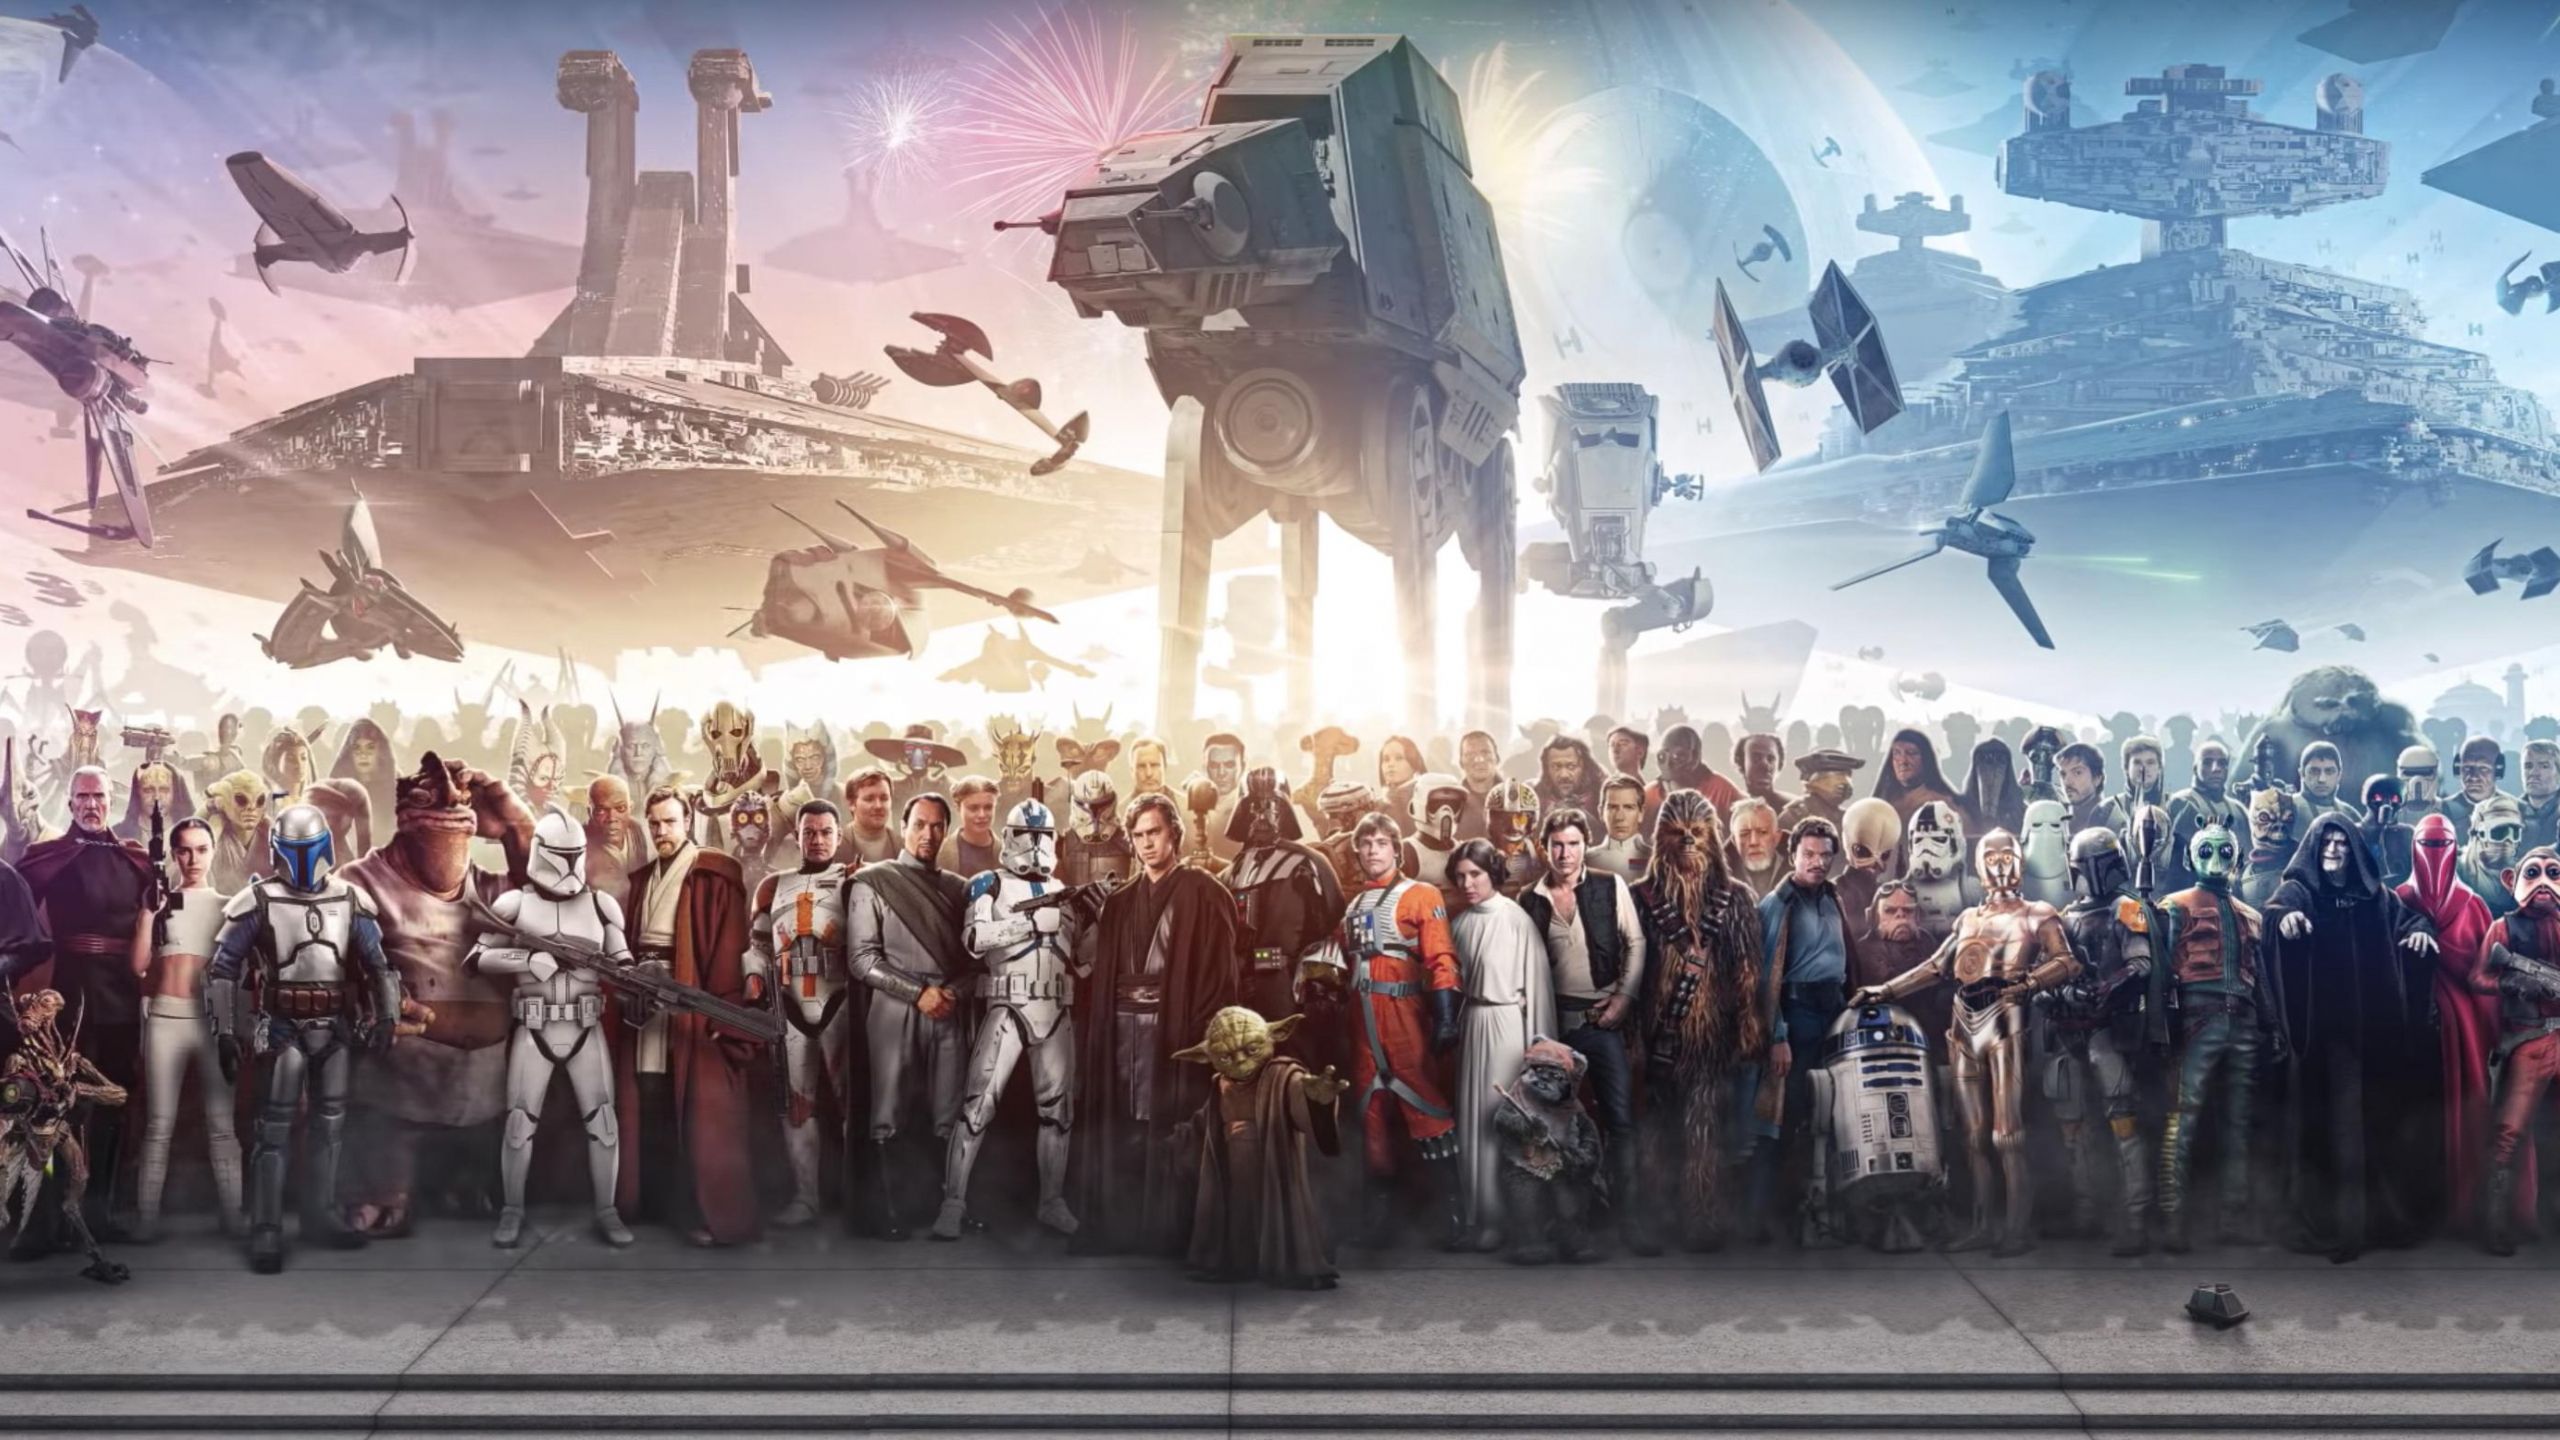 Epic Star Wars wallpapers in 2560x1440 resolution.